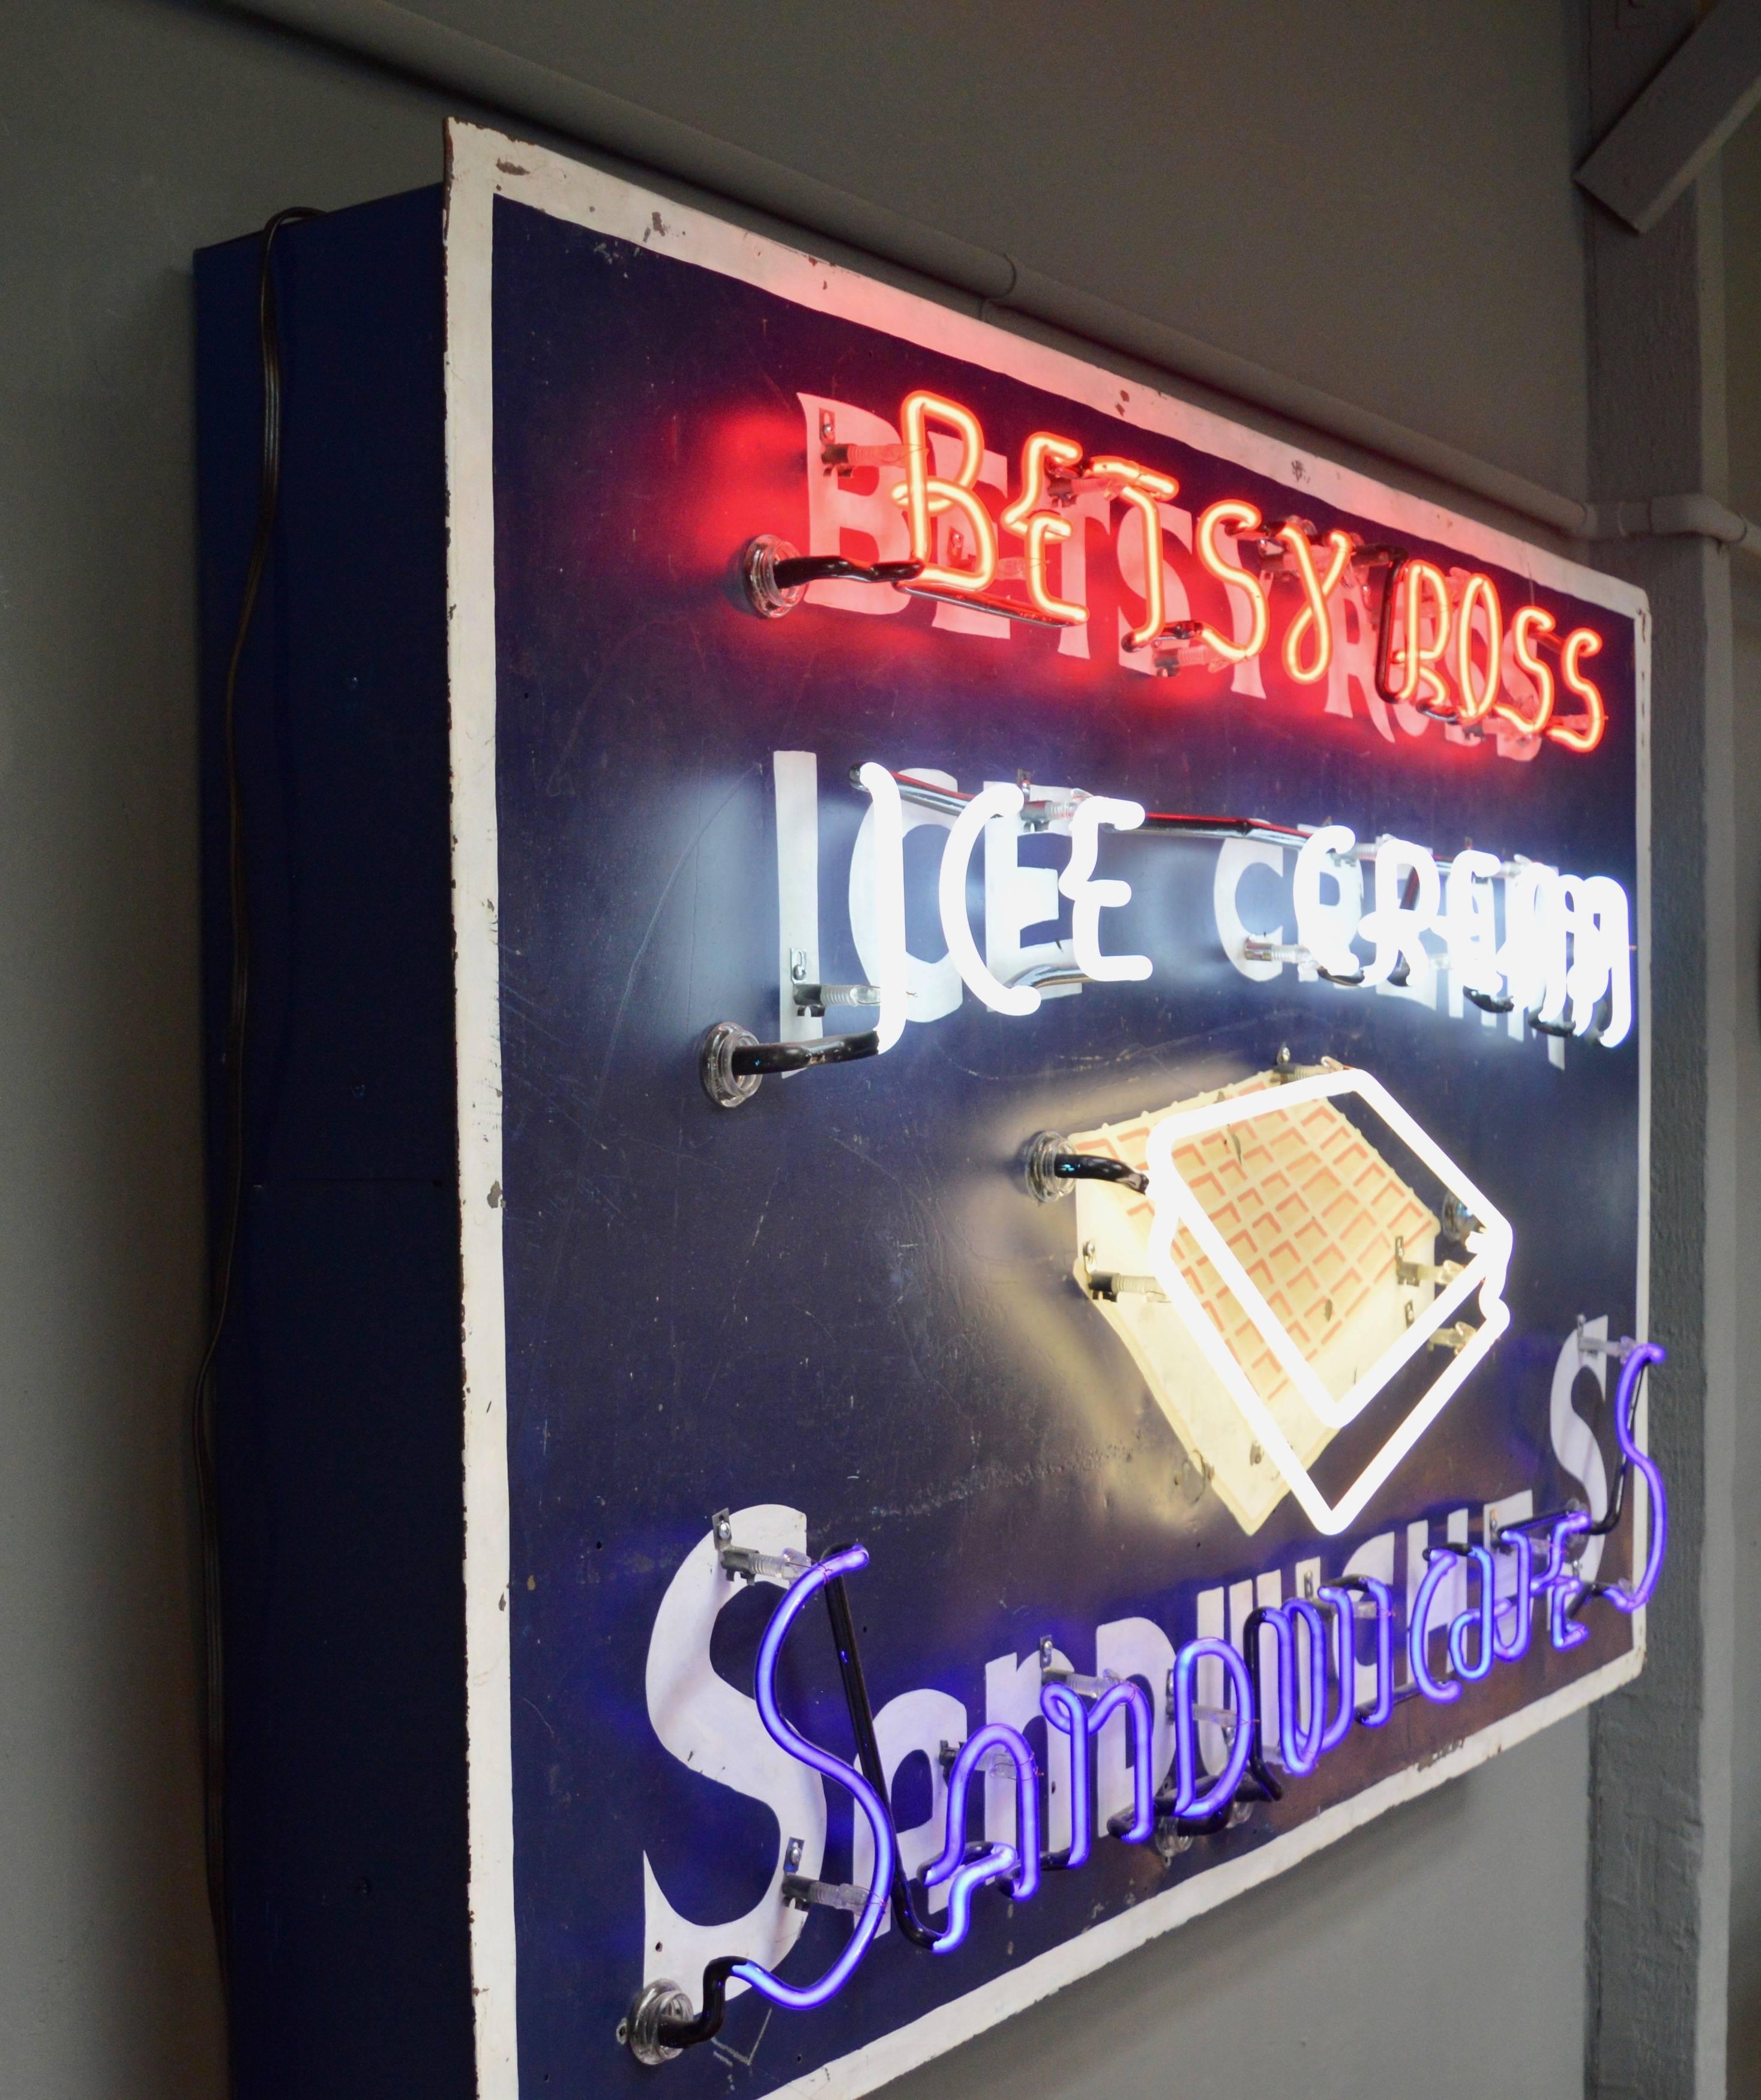 Great vintage 1950 neon sign in perfect working condition. Depicts Betsy Ross - Ice Cream Sandwiches. Neon is perfect. Newly rewired. Fantastic piece of pop art. Excellent vintage condition.